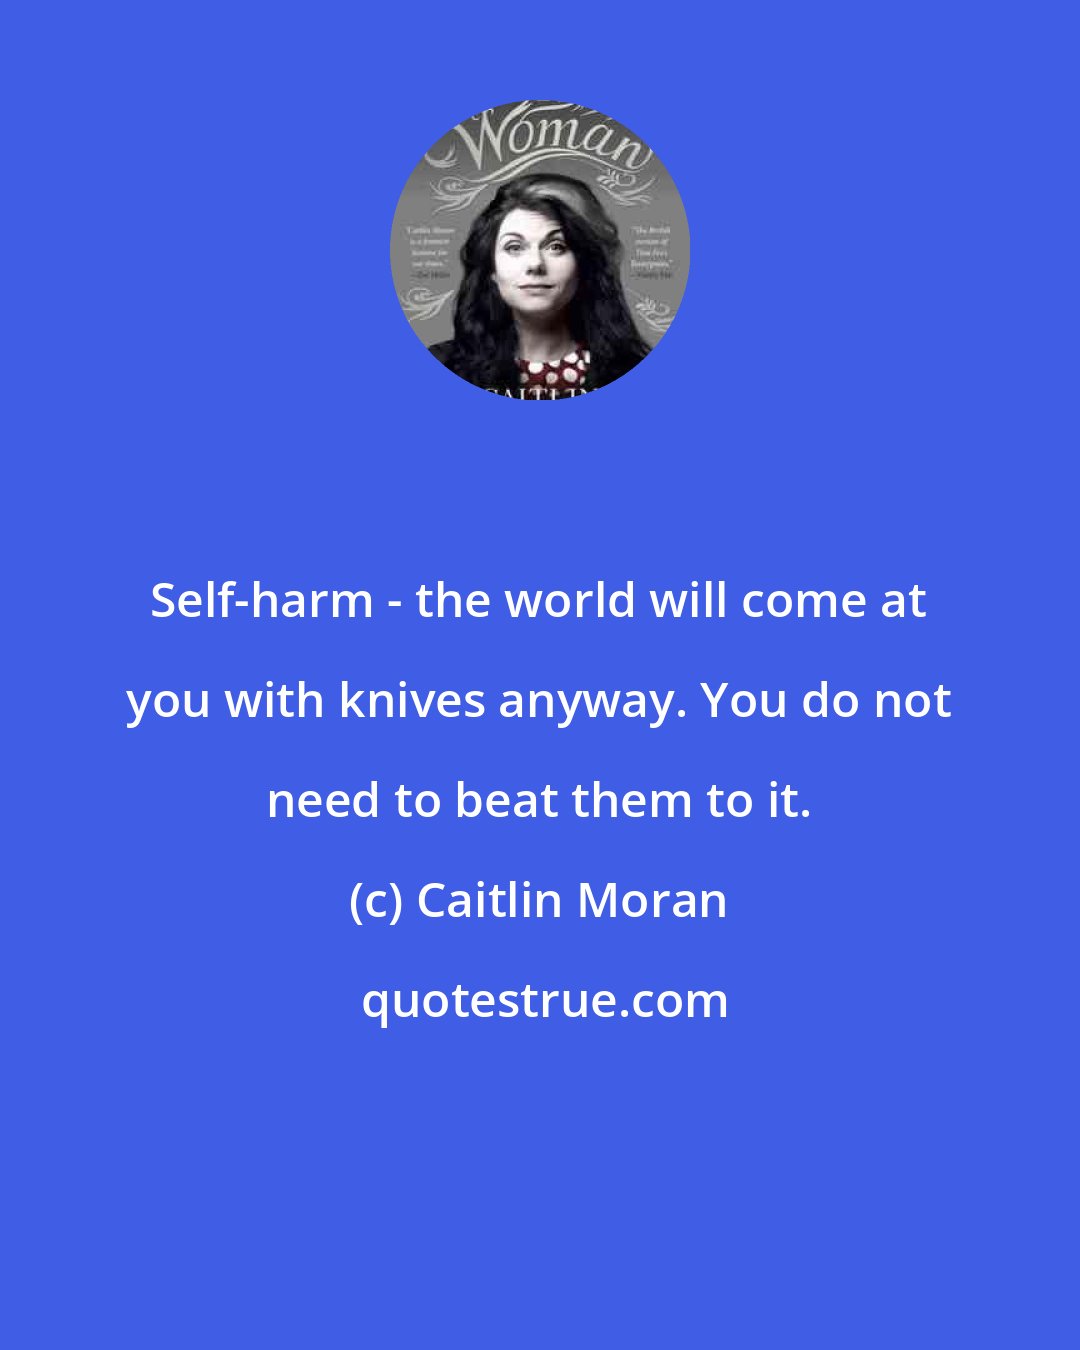 Caitlin Moran: Self-harm - the world will come at you with knives anyway. You do not need to beat them to it.